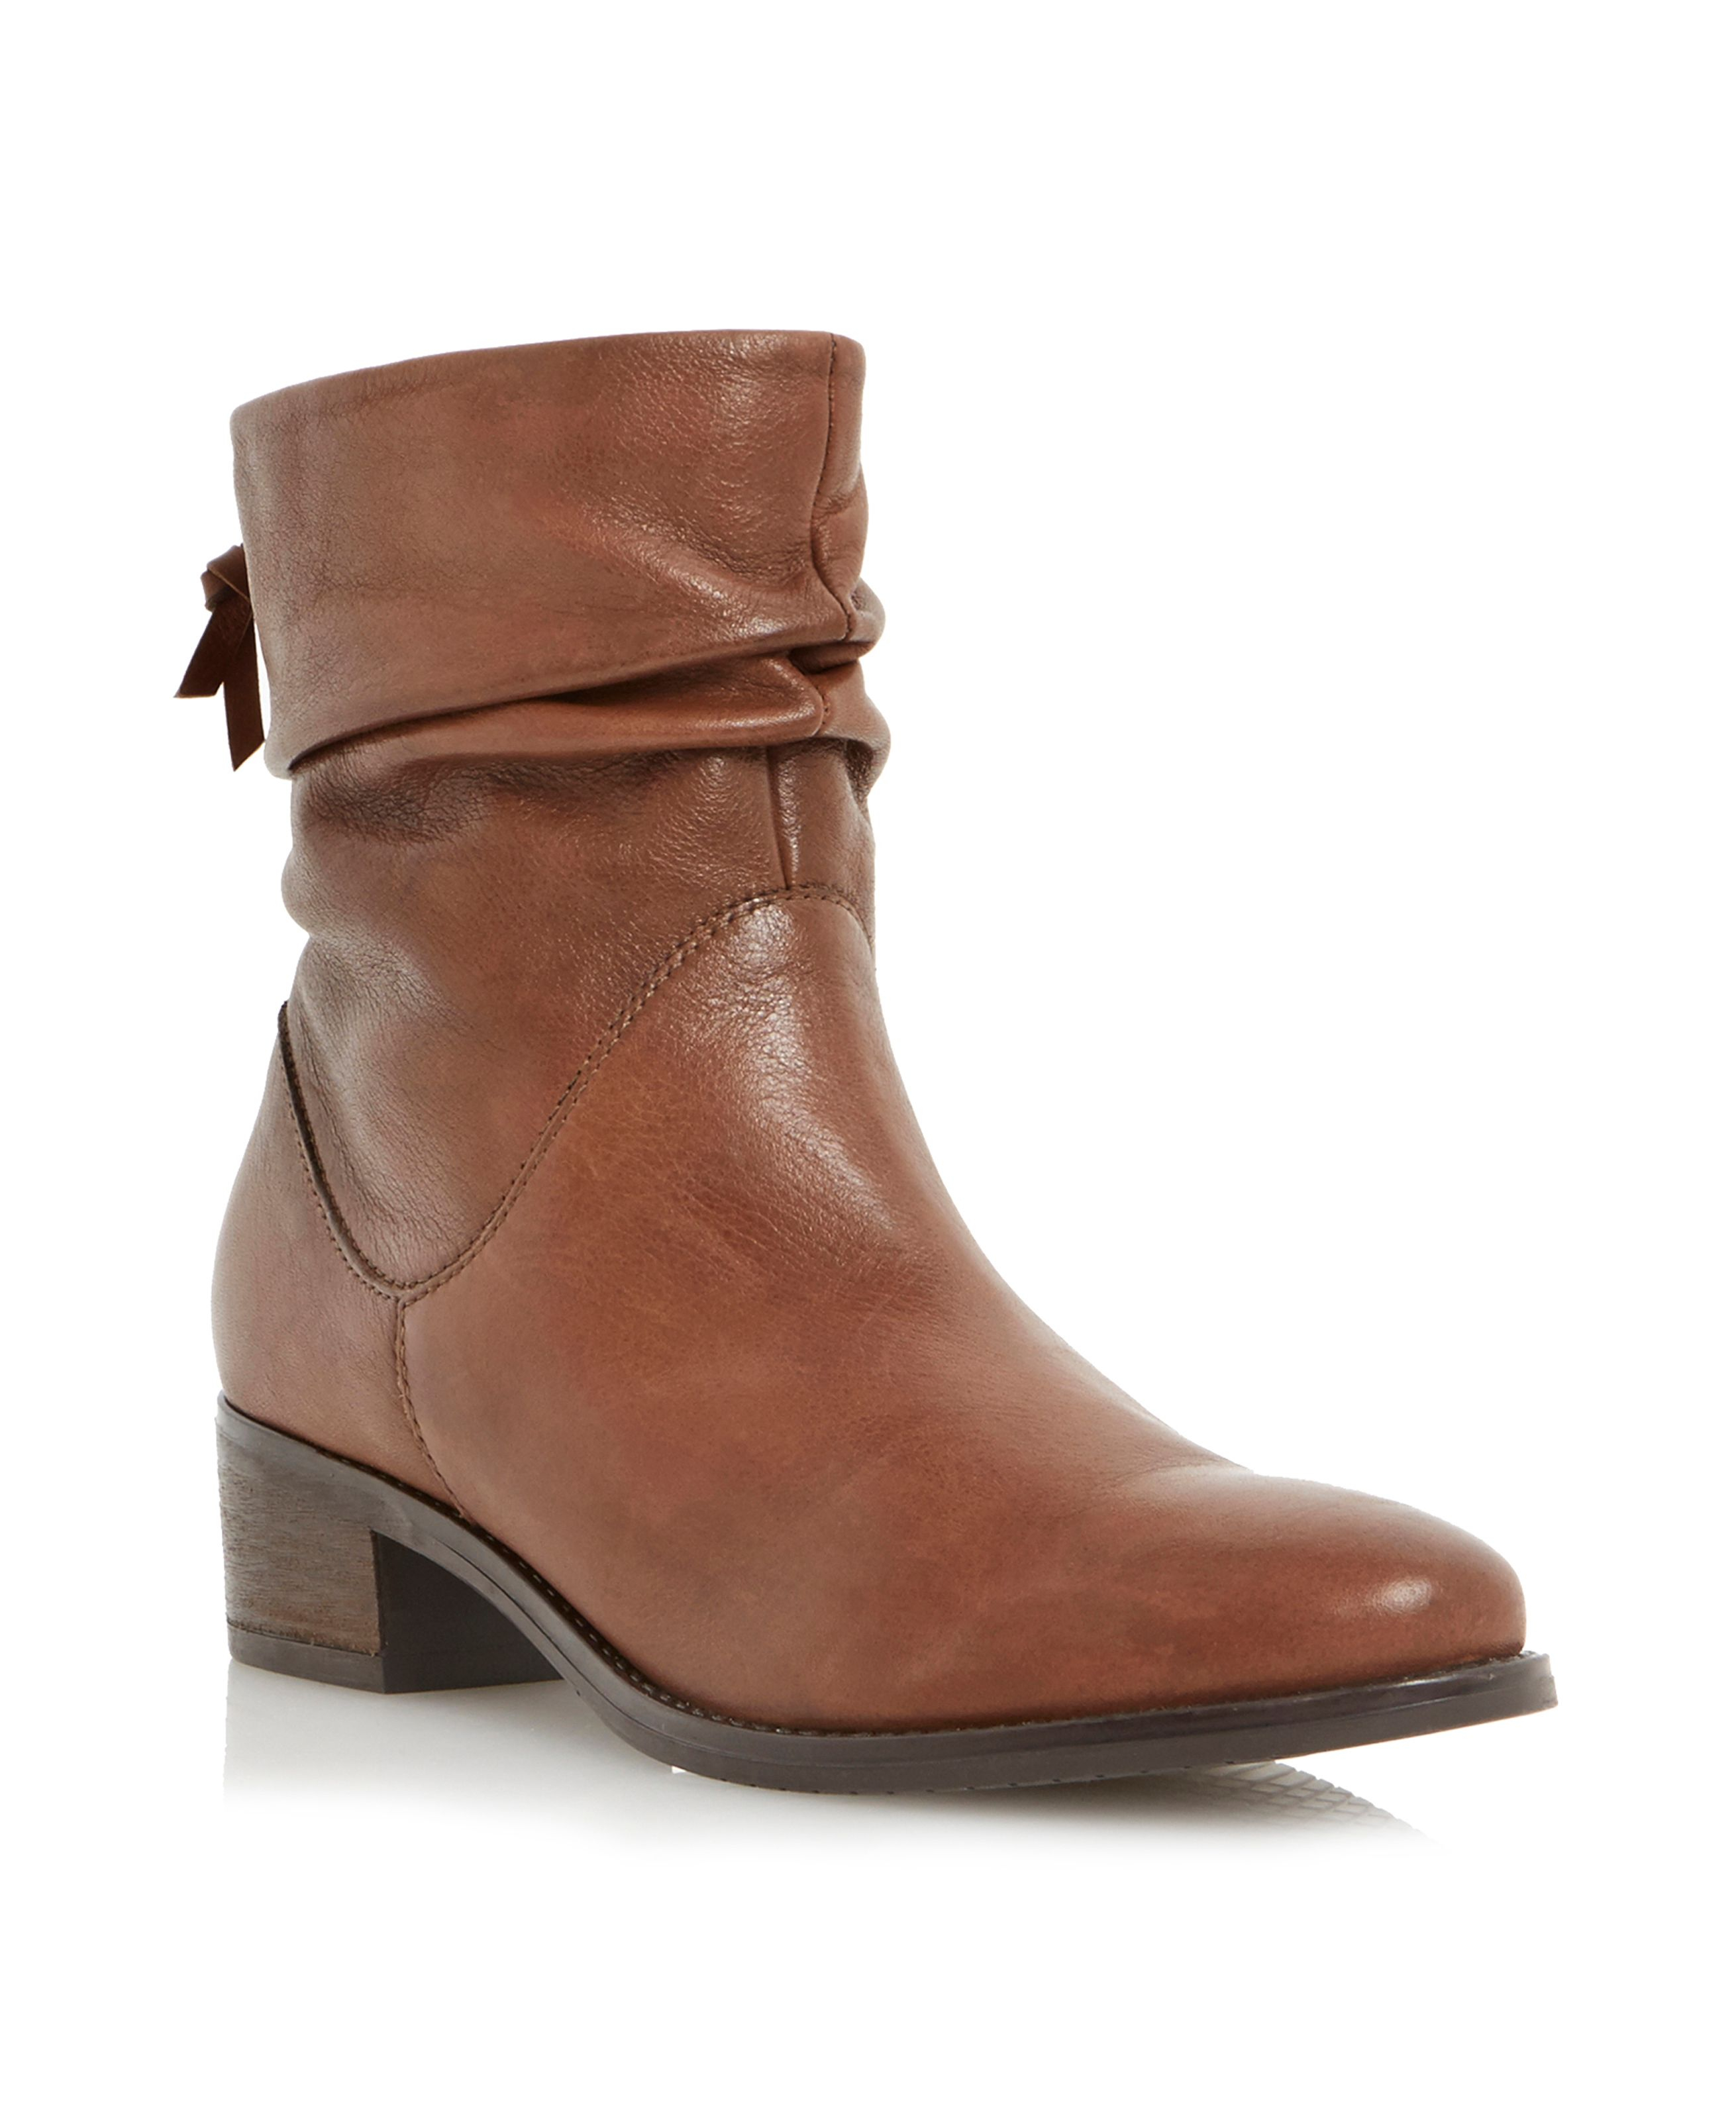 Lyst - Dune Pager Slouch Leather Ankle Boot in Brown